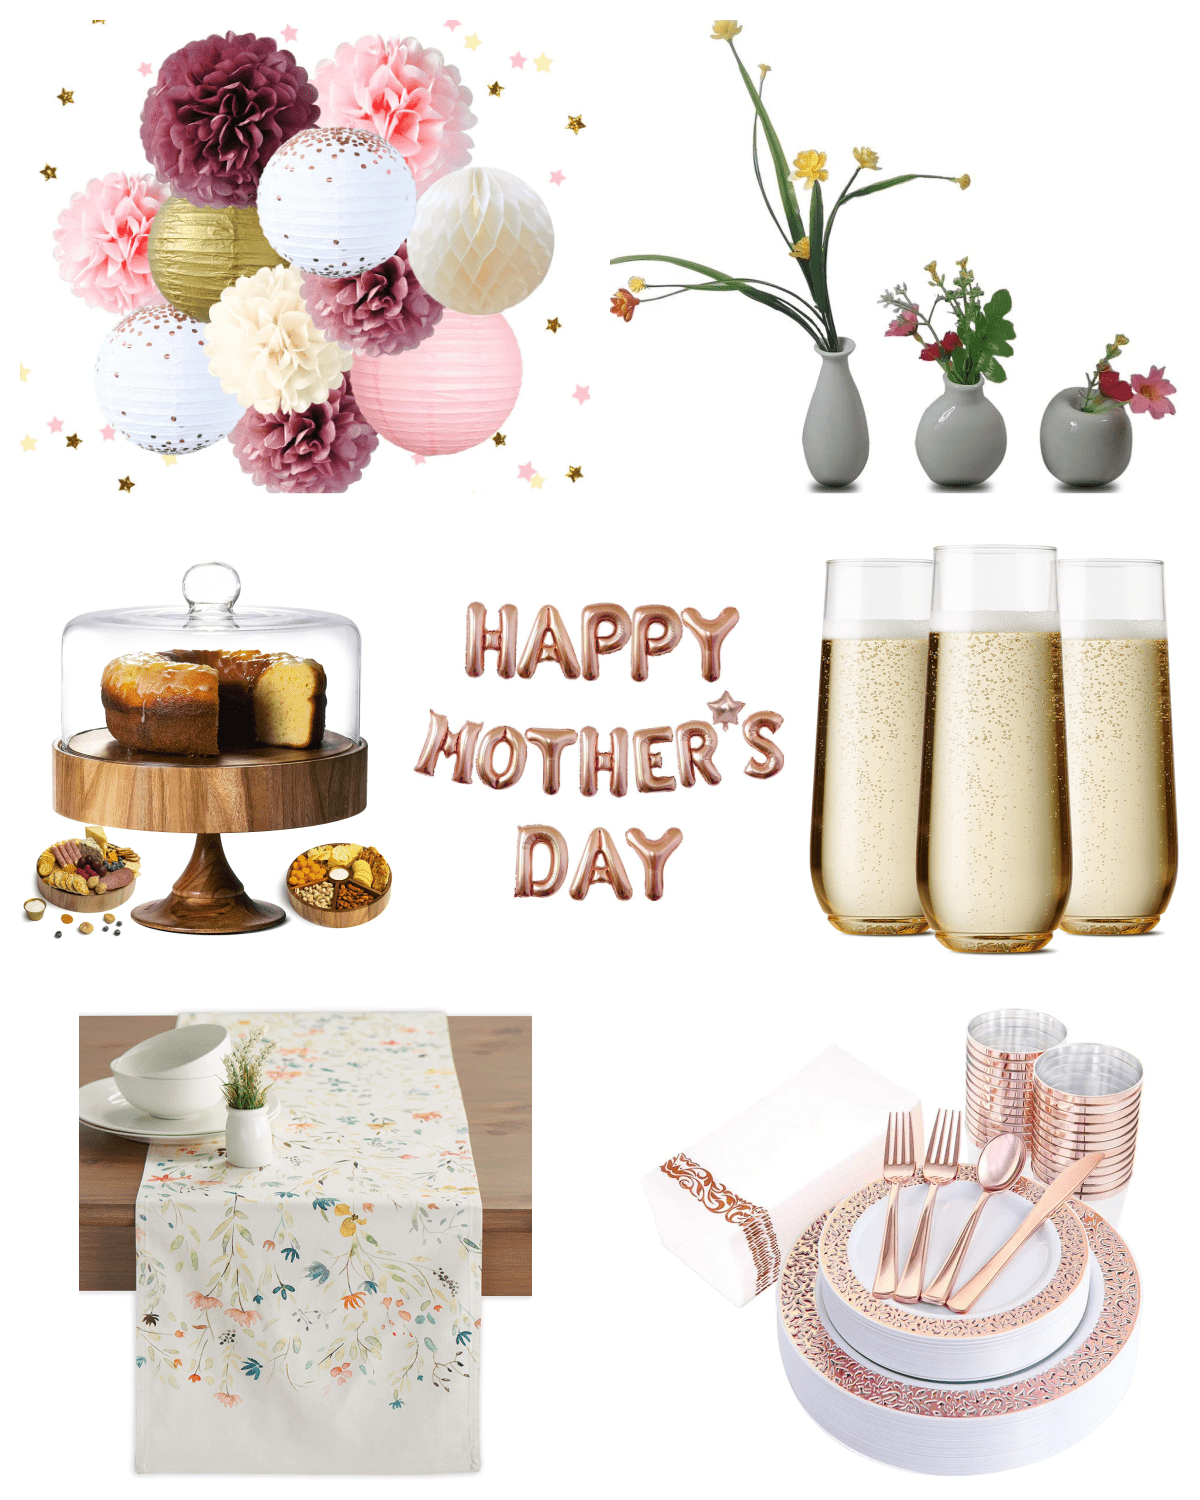 Mother's Day Gathering Guide by The BakerMama